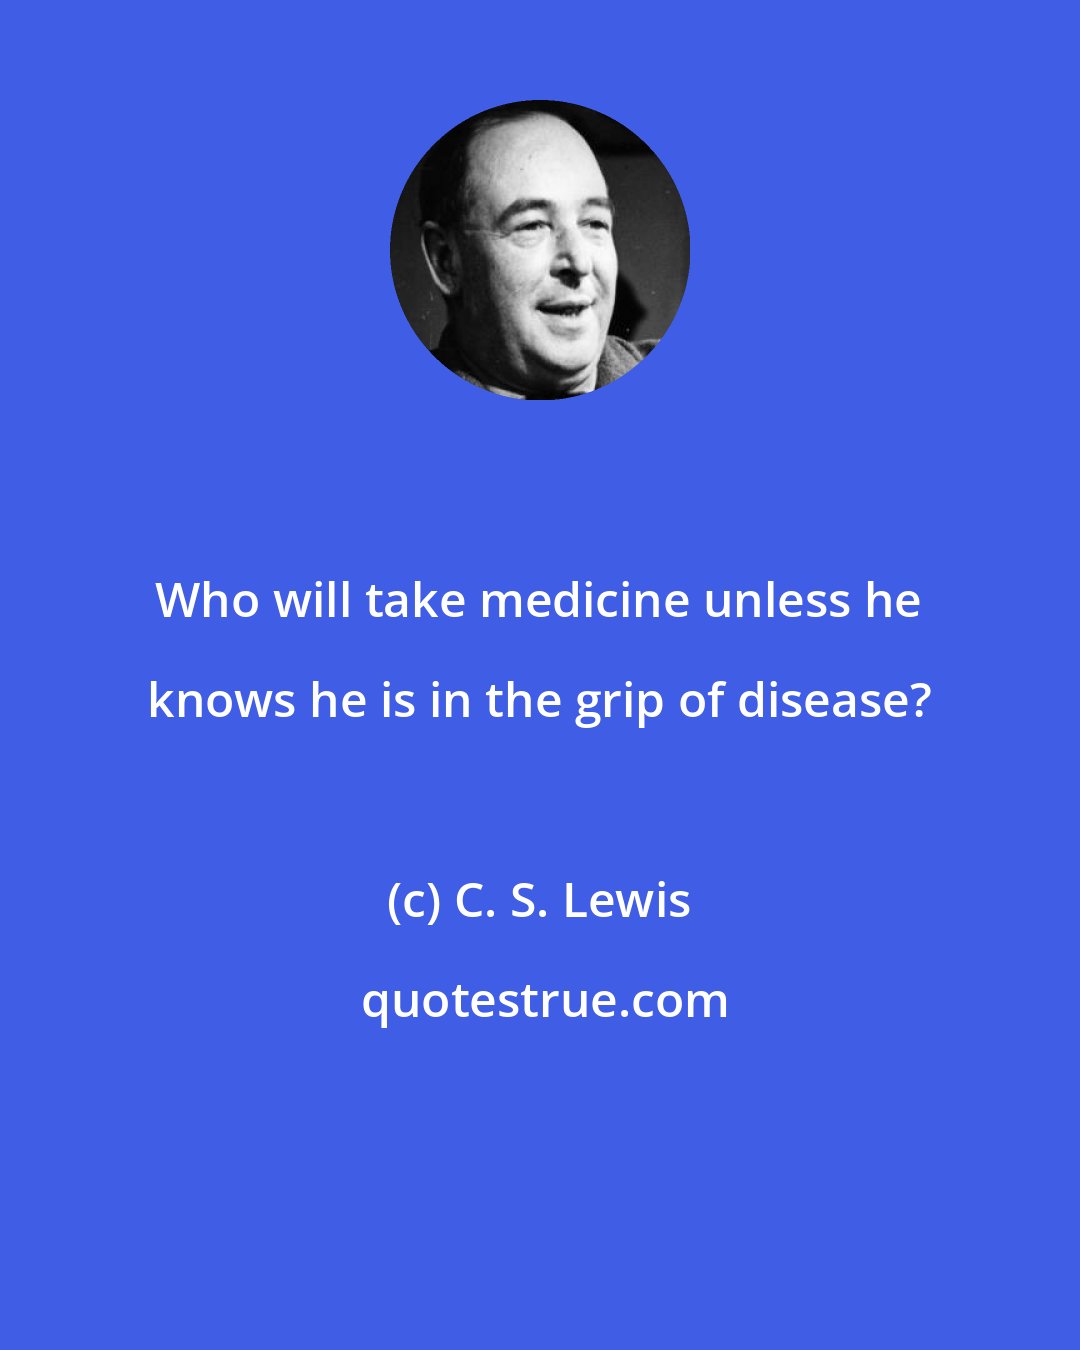 C. S. Lewis: Who will take medicine unless he knows he is in the grip of disease?